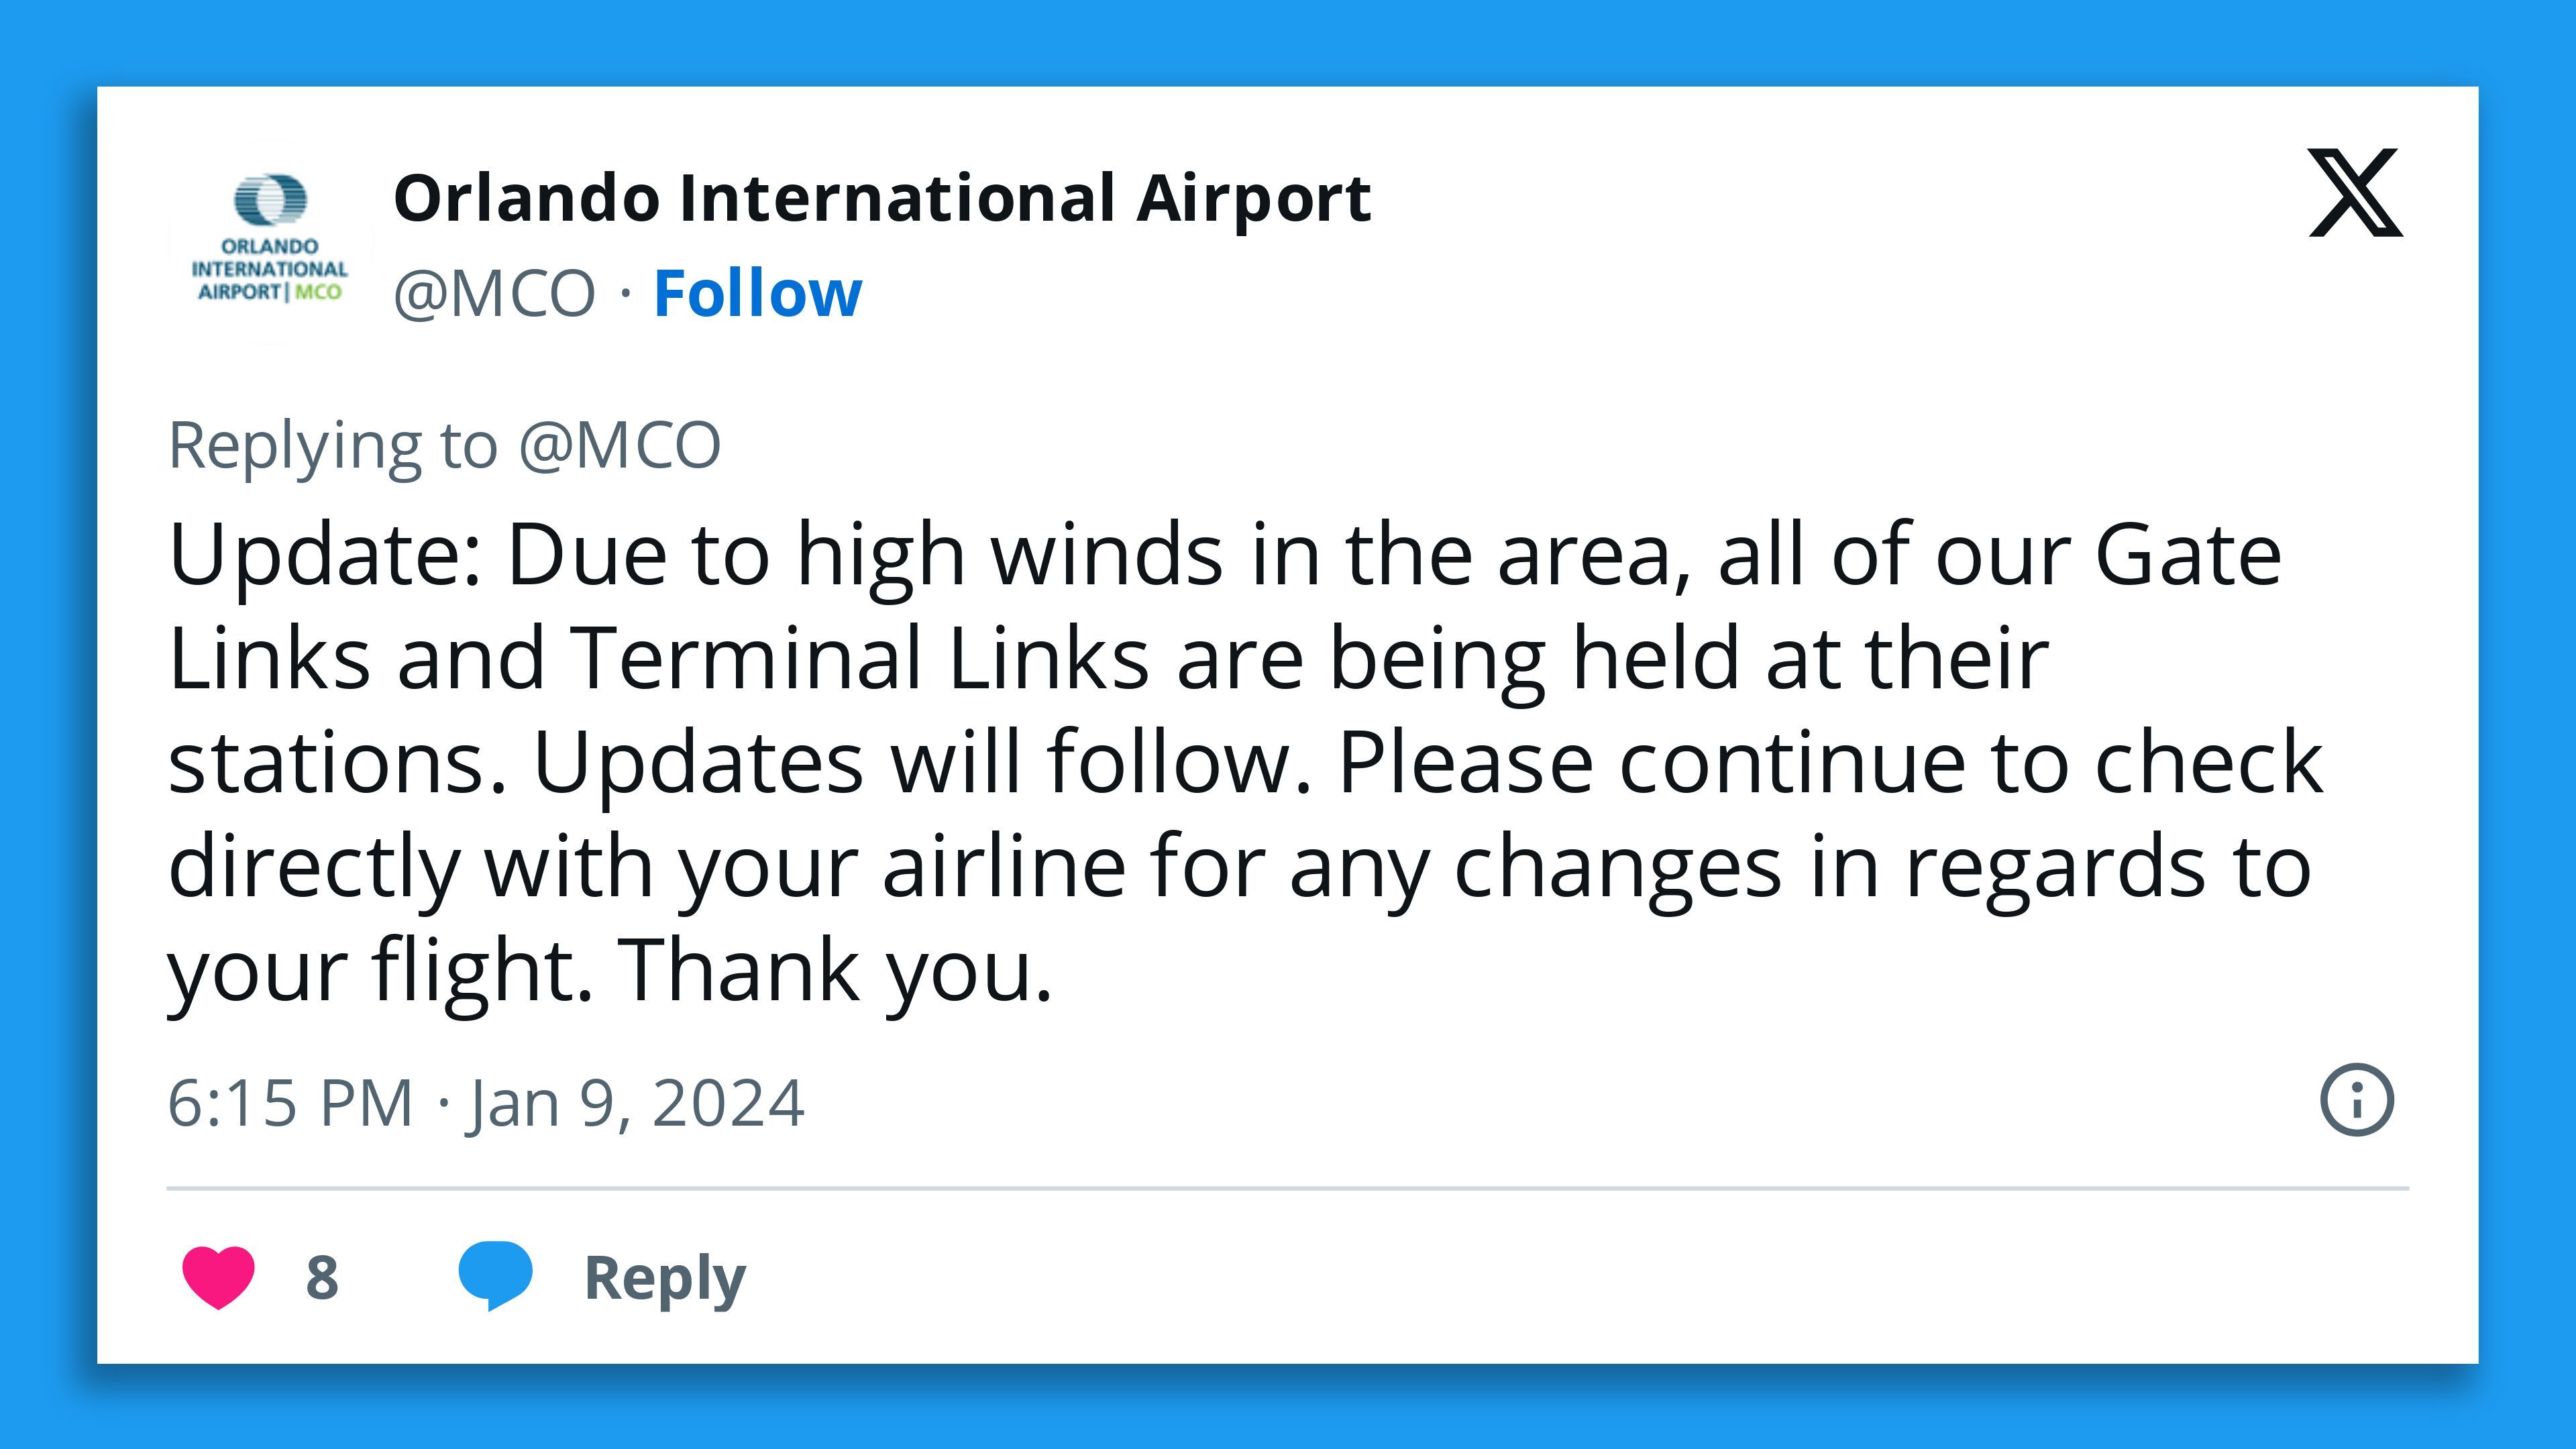 A screenshot of an Orlando International Airport tweet, saying: "Update: Due to high winds in the area, all of our Gate Links and Terminal Links are being held at their stations. Updates will follow. Please continue to check directly with your airline for any changes in regards to your flight. Thank you."